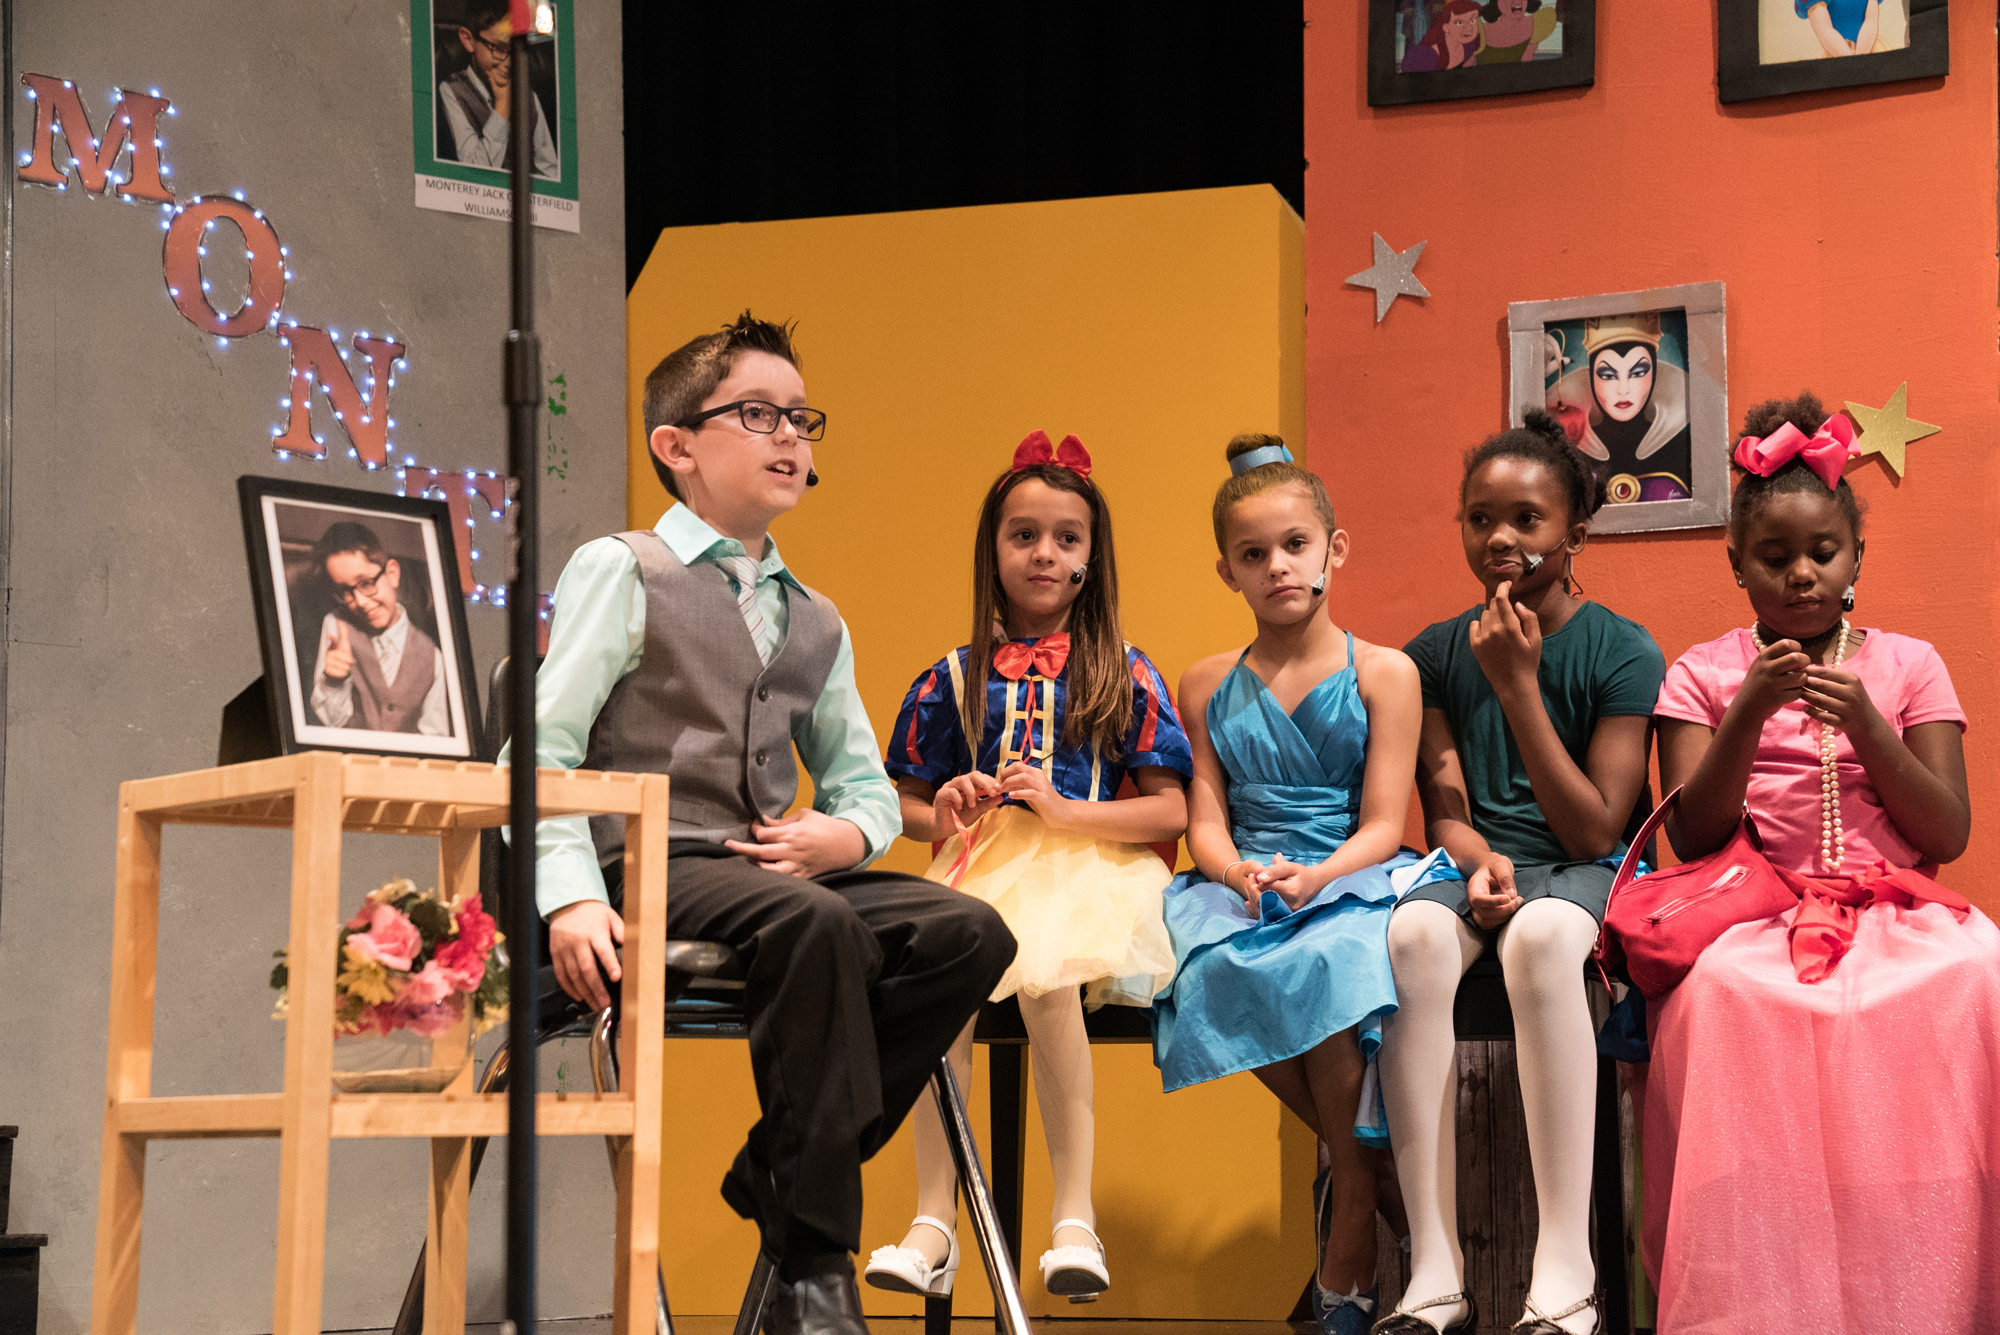 Orlando Premier Music Instruction currently offers musical theater classes at SunRidge and Whispering Oak elementary schools, along with Horizon West Middle School. (Courtesy OPMI)